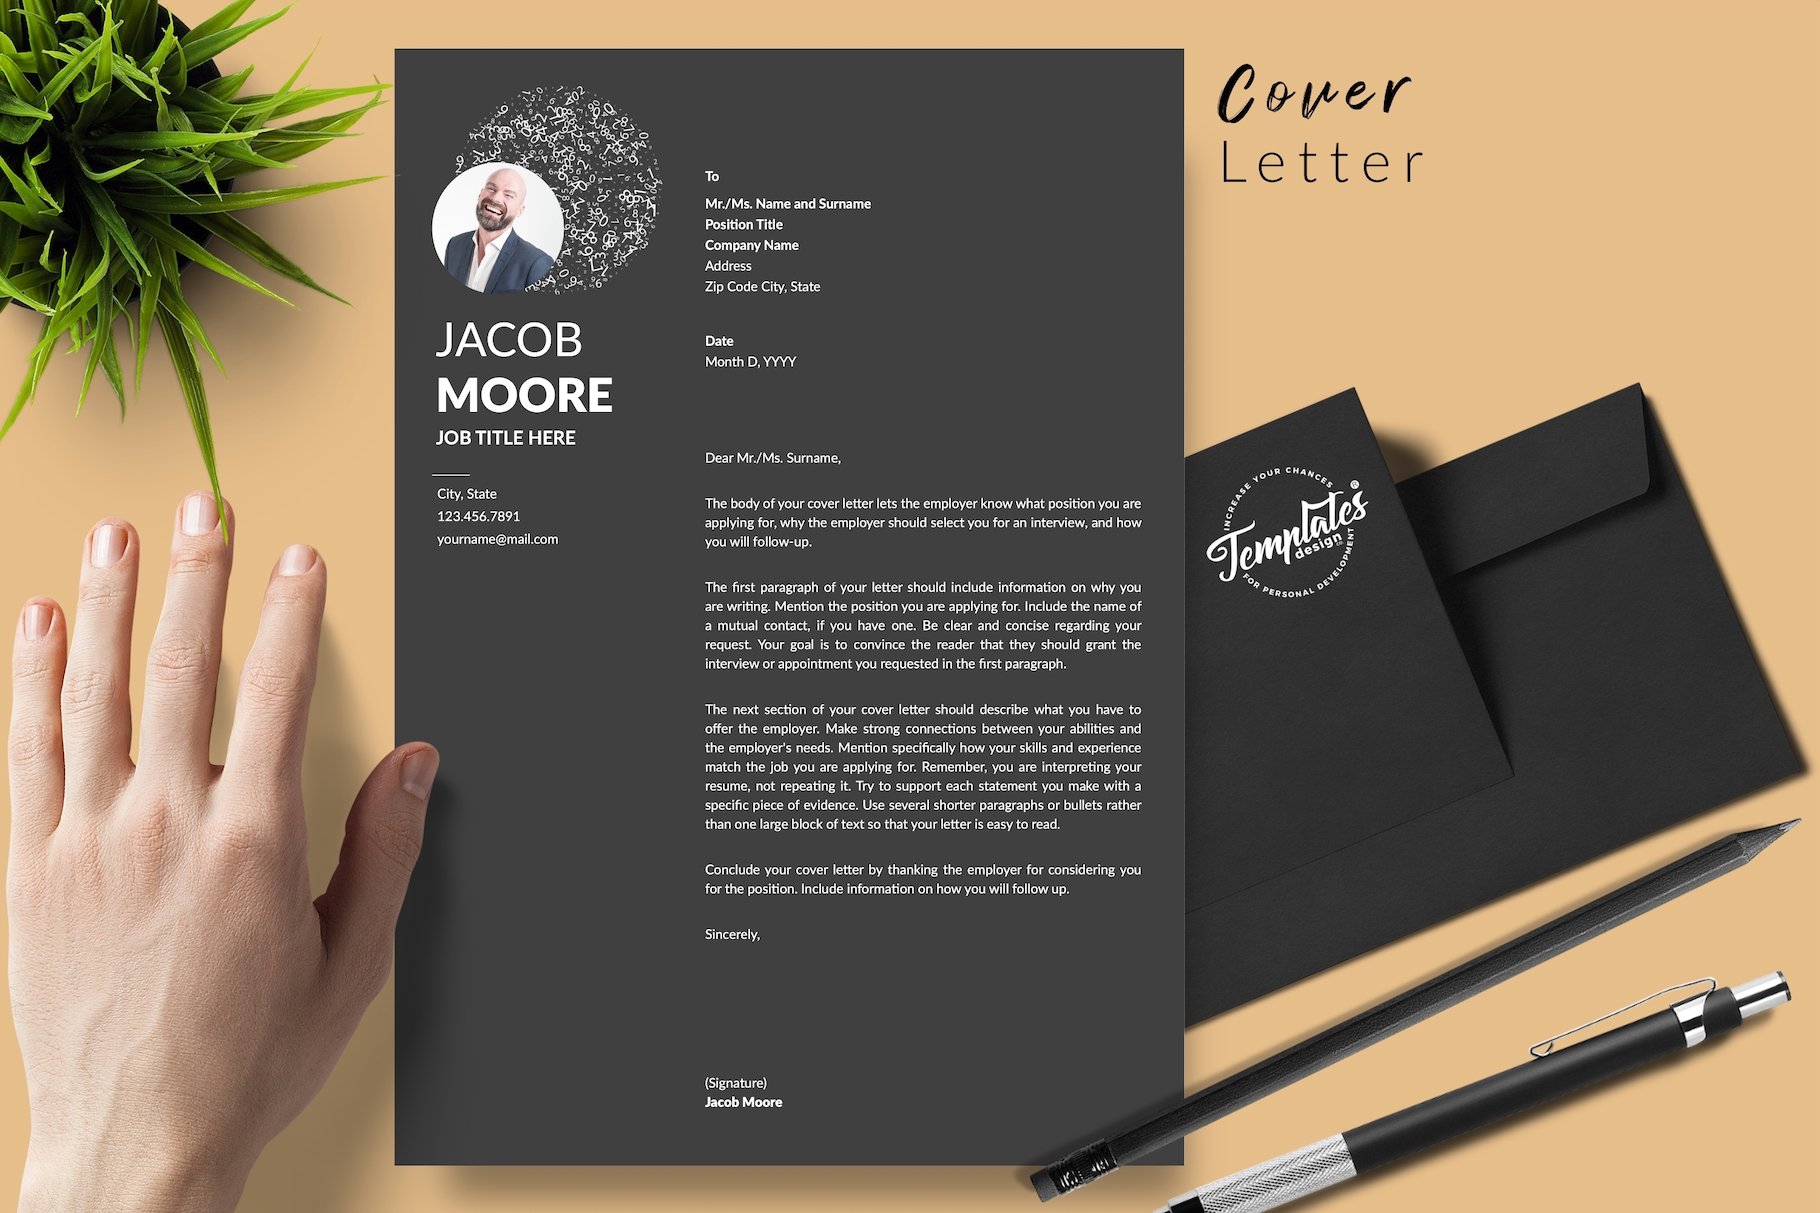 resume cv template jacob moore 282in1 special edition29 for creative market 05 cover letter black edition 495